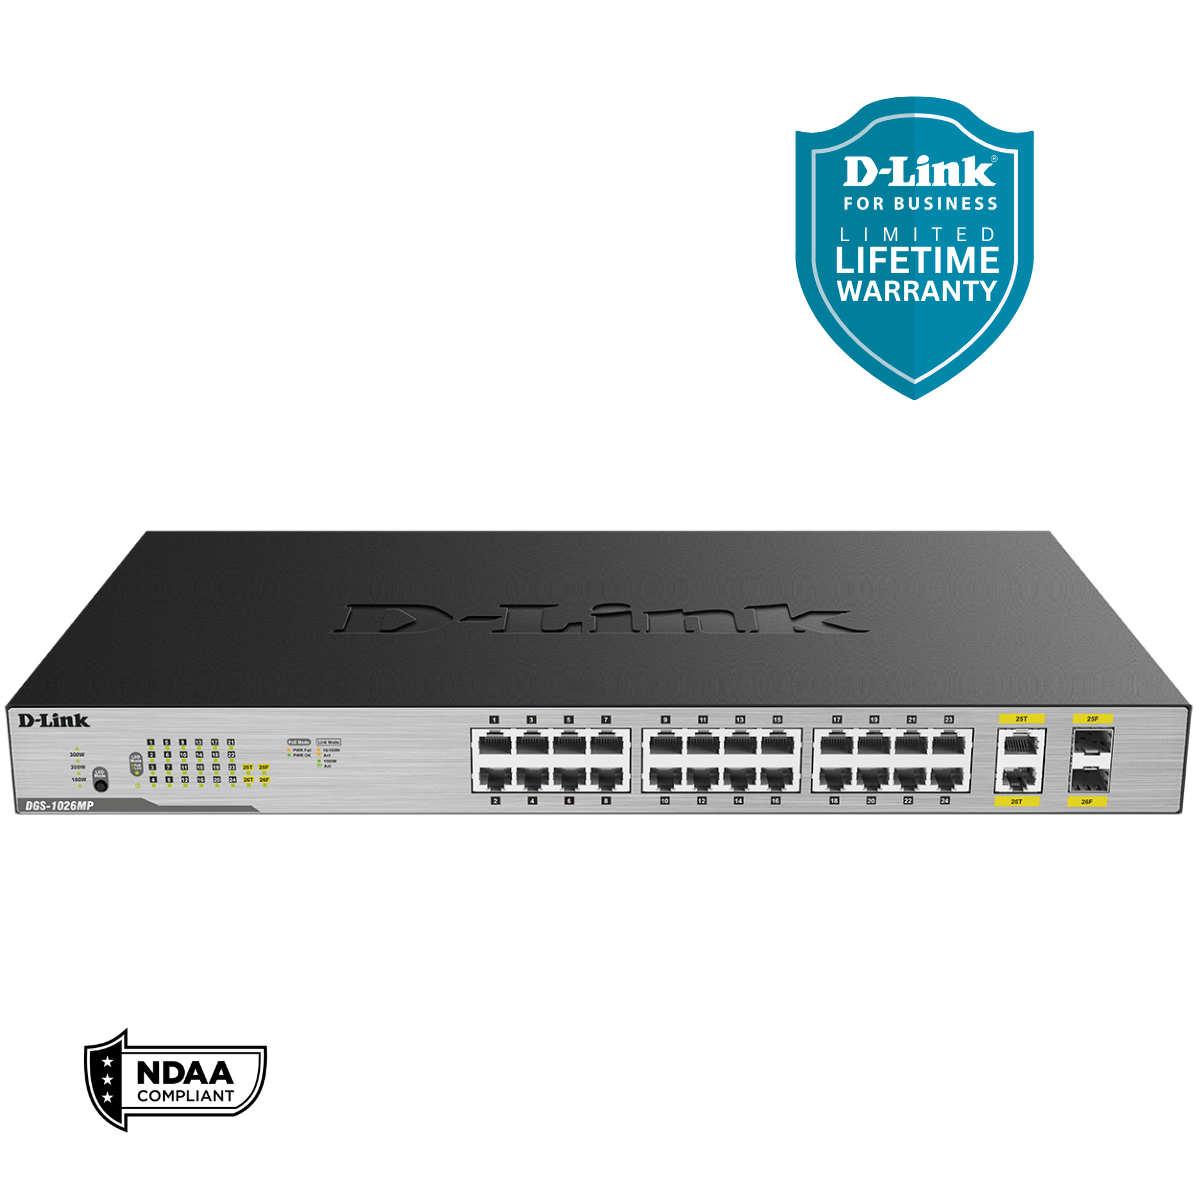 D-Link 24-Port PoE+ Gigabit Unmanaged Switch (370W PoE Budget) with 2 –  D-Link Systems, Inc